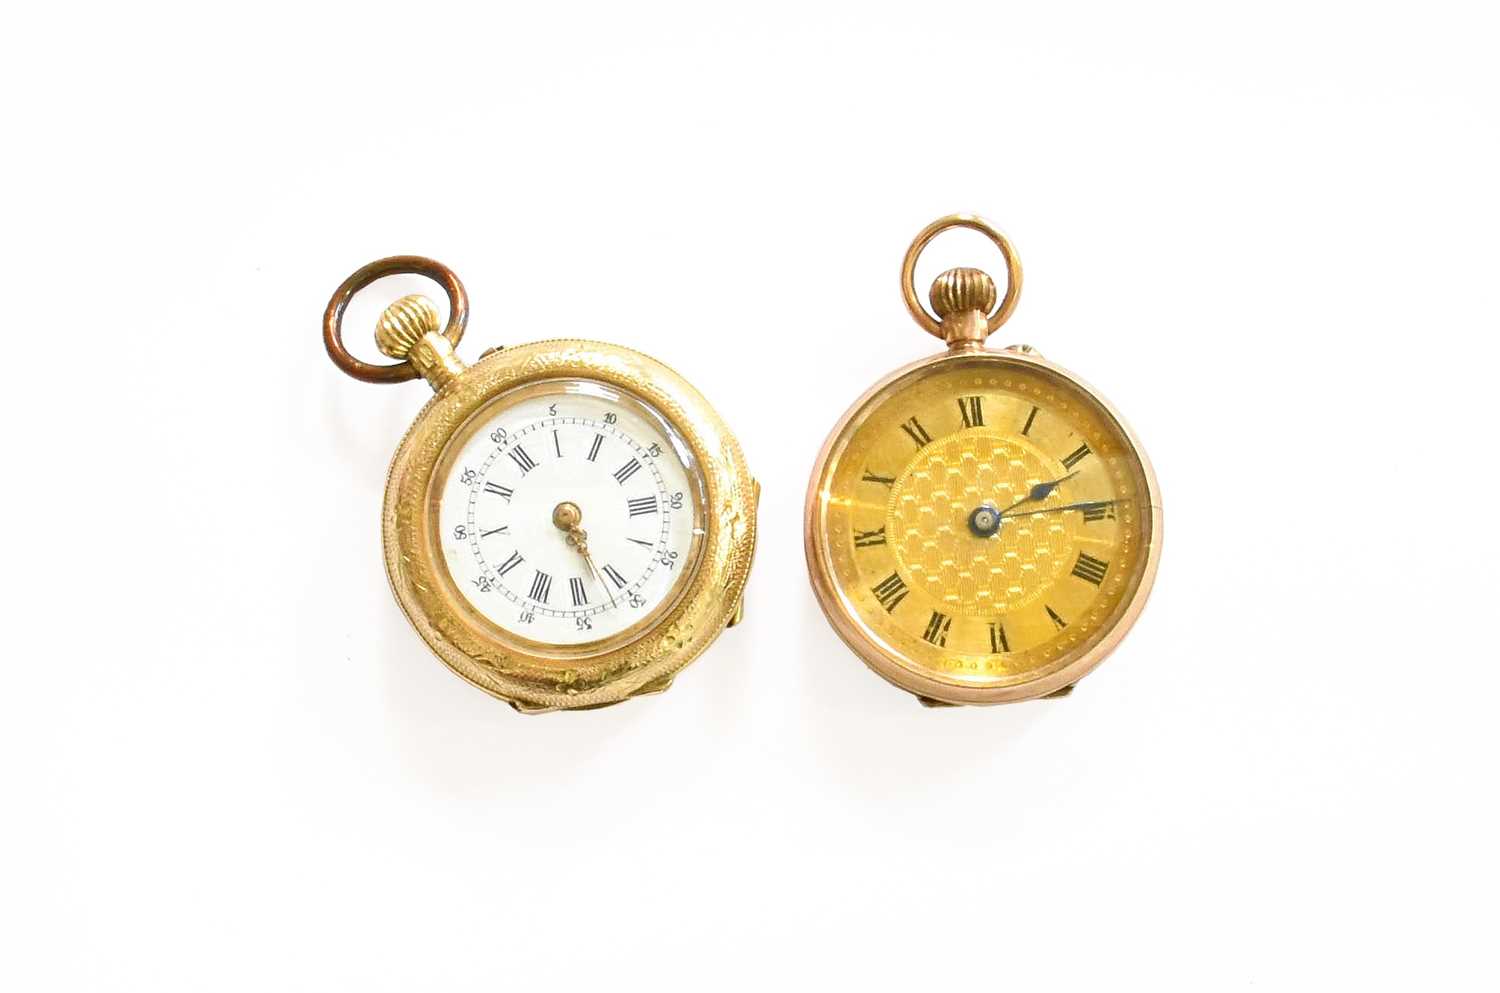 A Lady's 14 Carat Gold and Enamel Fob Watch, case stamped 0.585, and a Lady's 9 Carat Gold Fob